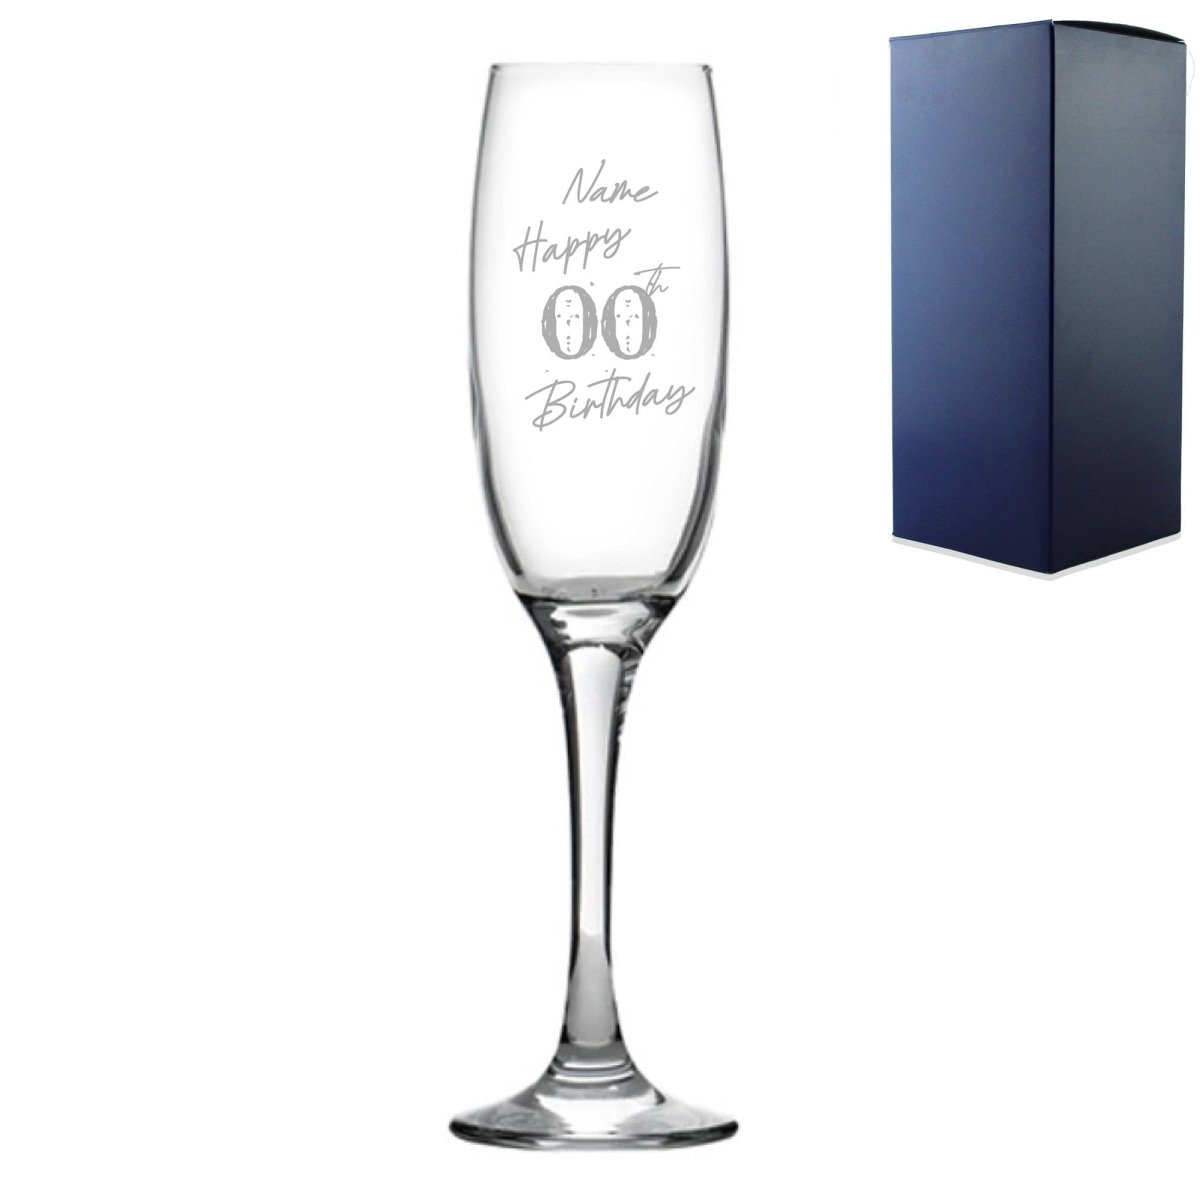 Engraved Champagne Flute Happy 20th, 30th, 40th, 50th ... Birthday Speckled